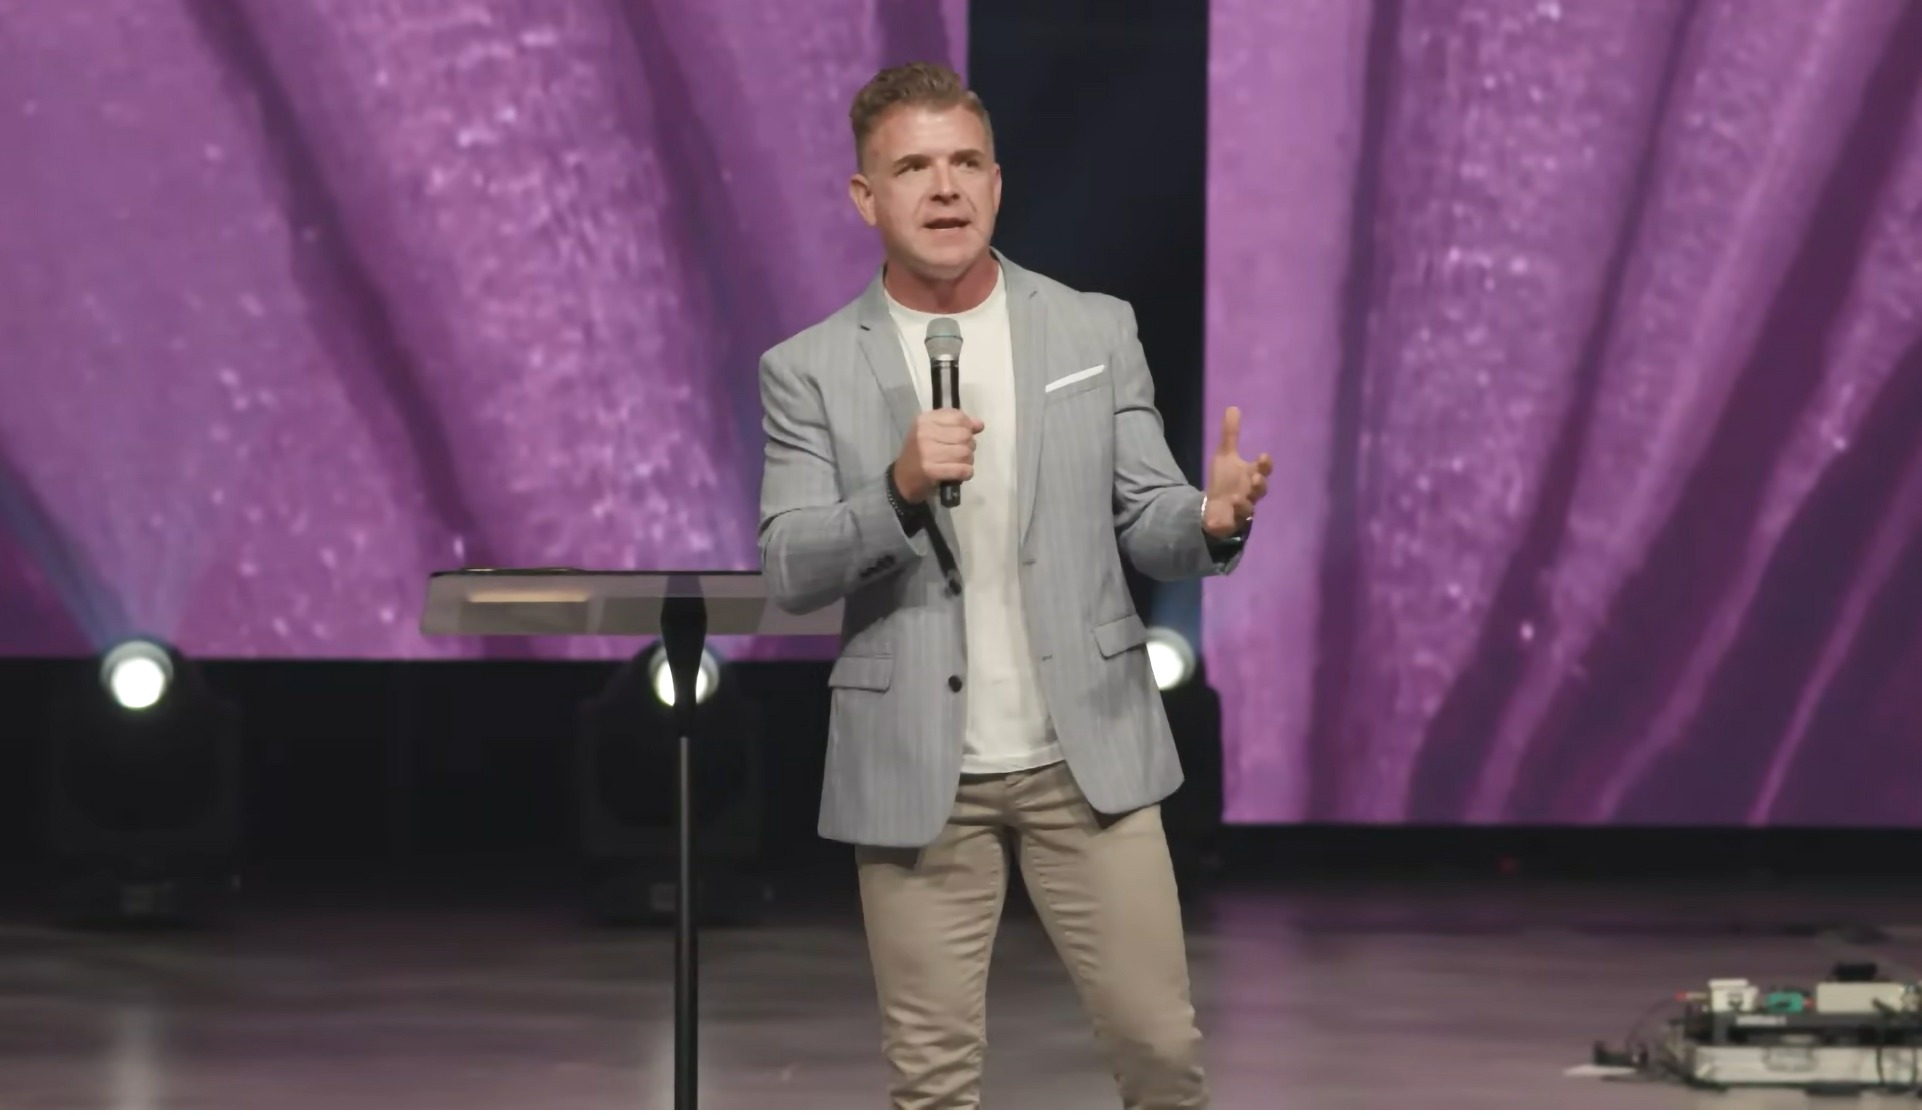 Jeremy Foster, Hope City Church founder who resigned over affair, breaks silence